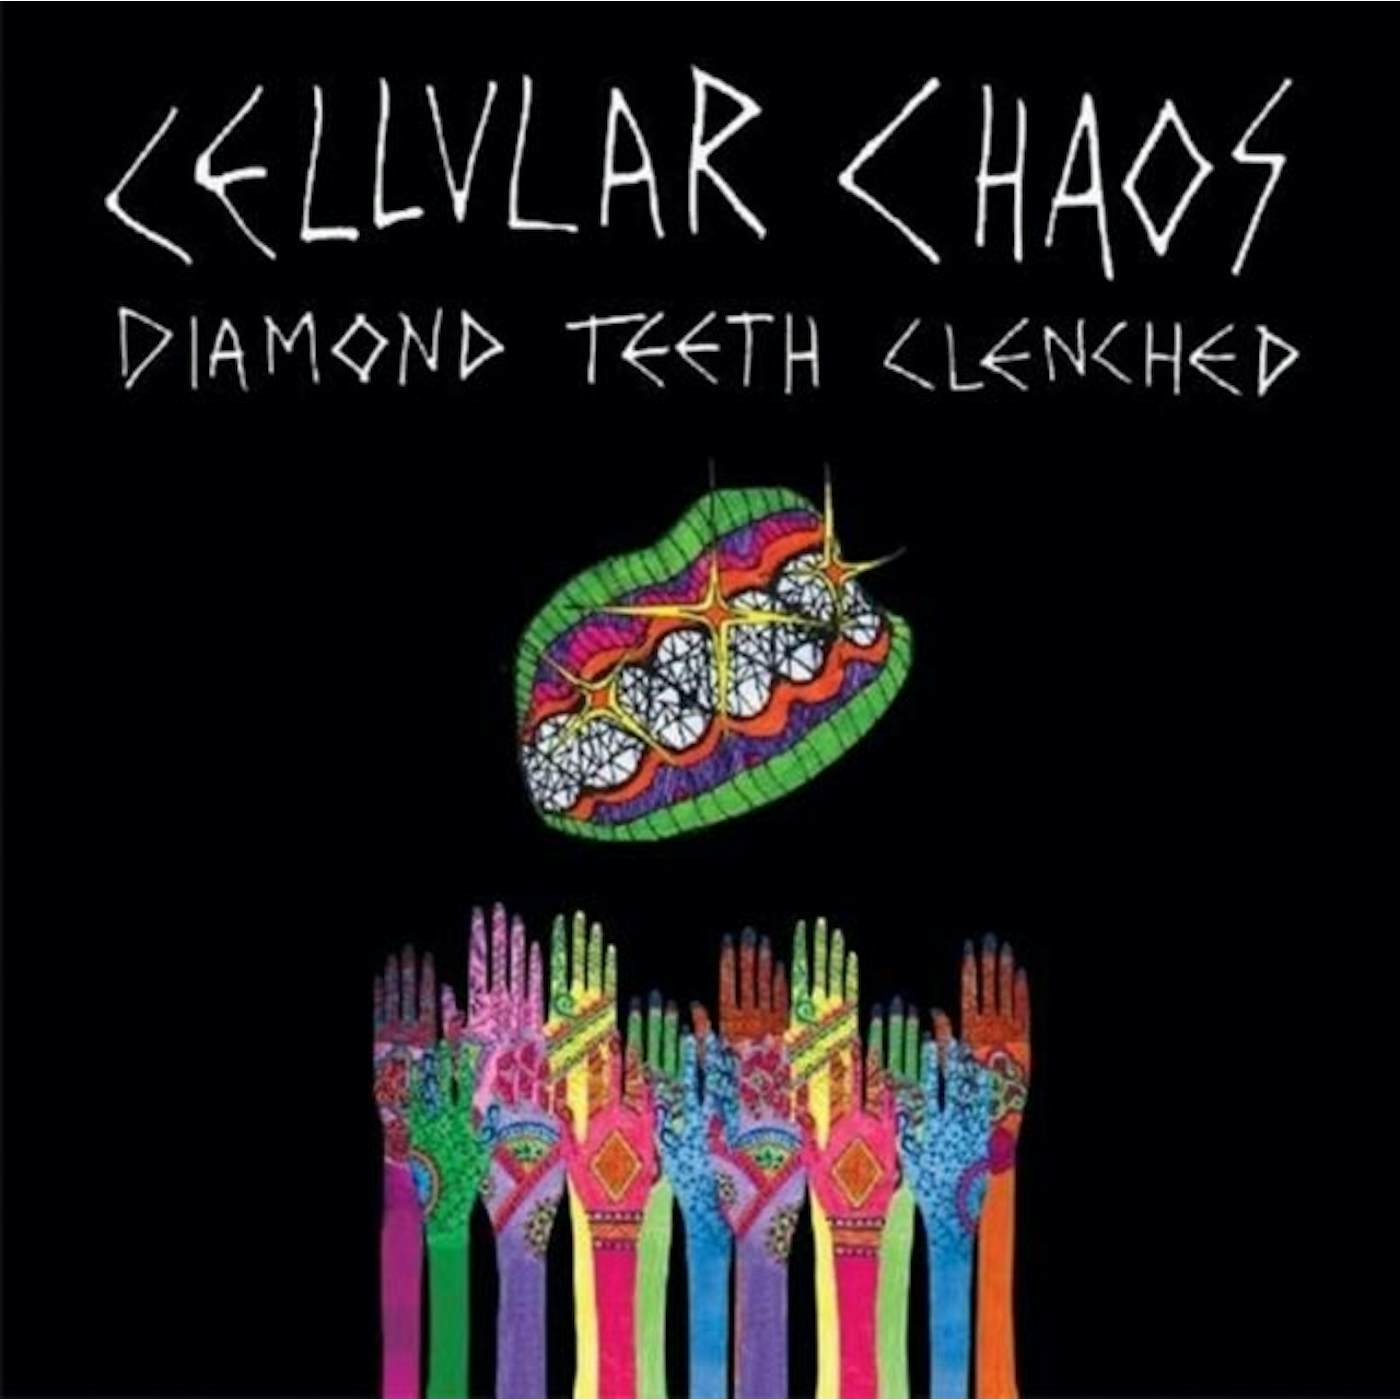 Cellular Chaos LP - Diamond Teeth Clenched (Vinyl)